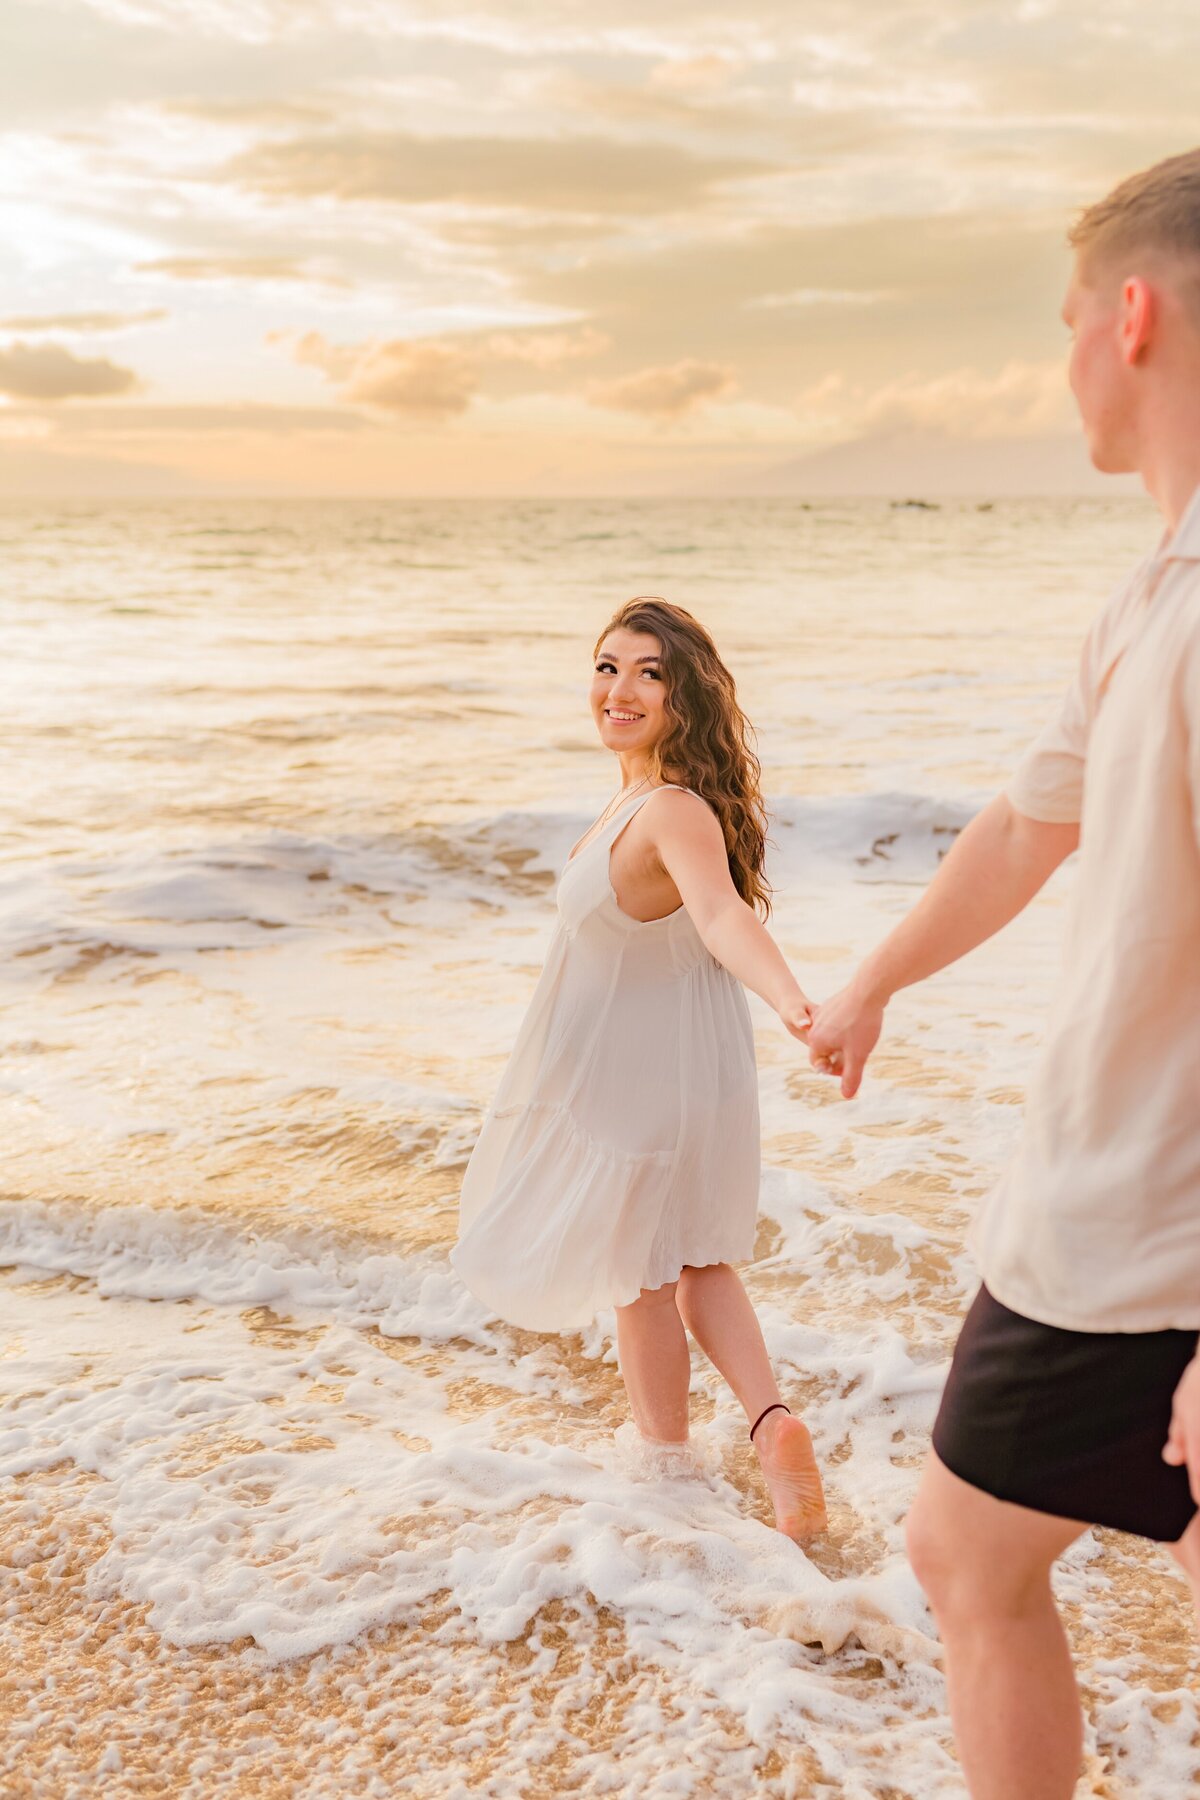 Brunette woman wearing a white dress leads her boyfriend into the water on the beach in Hawaii